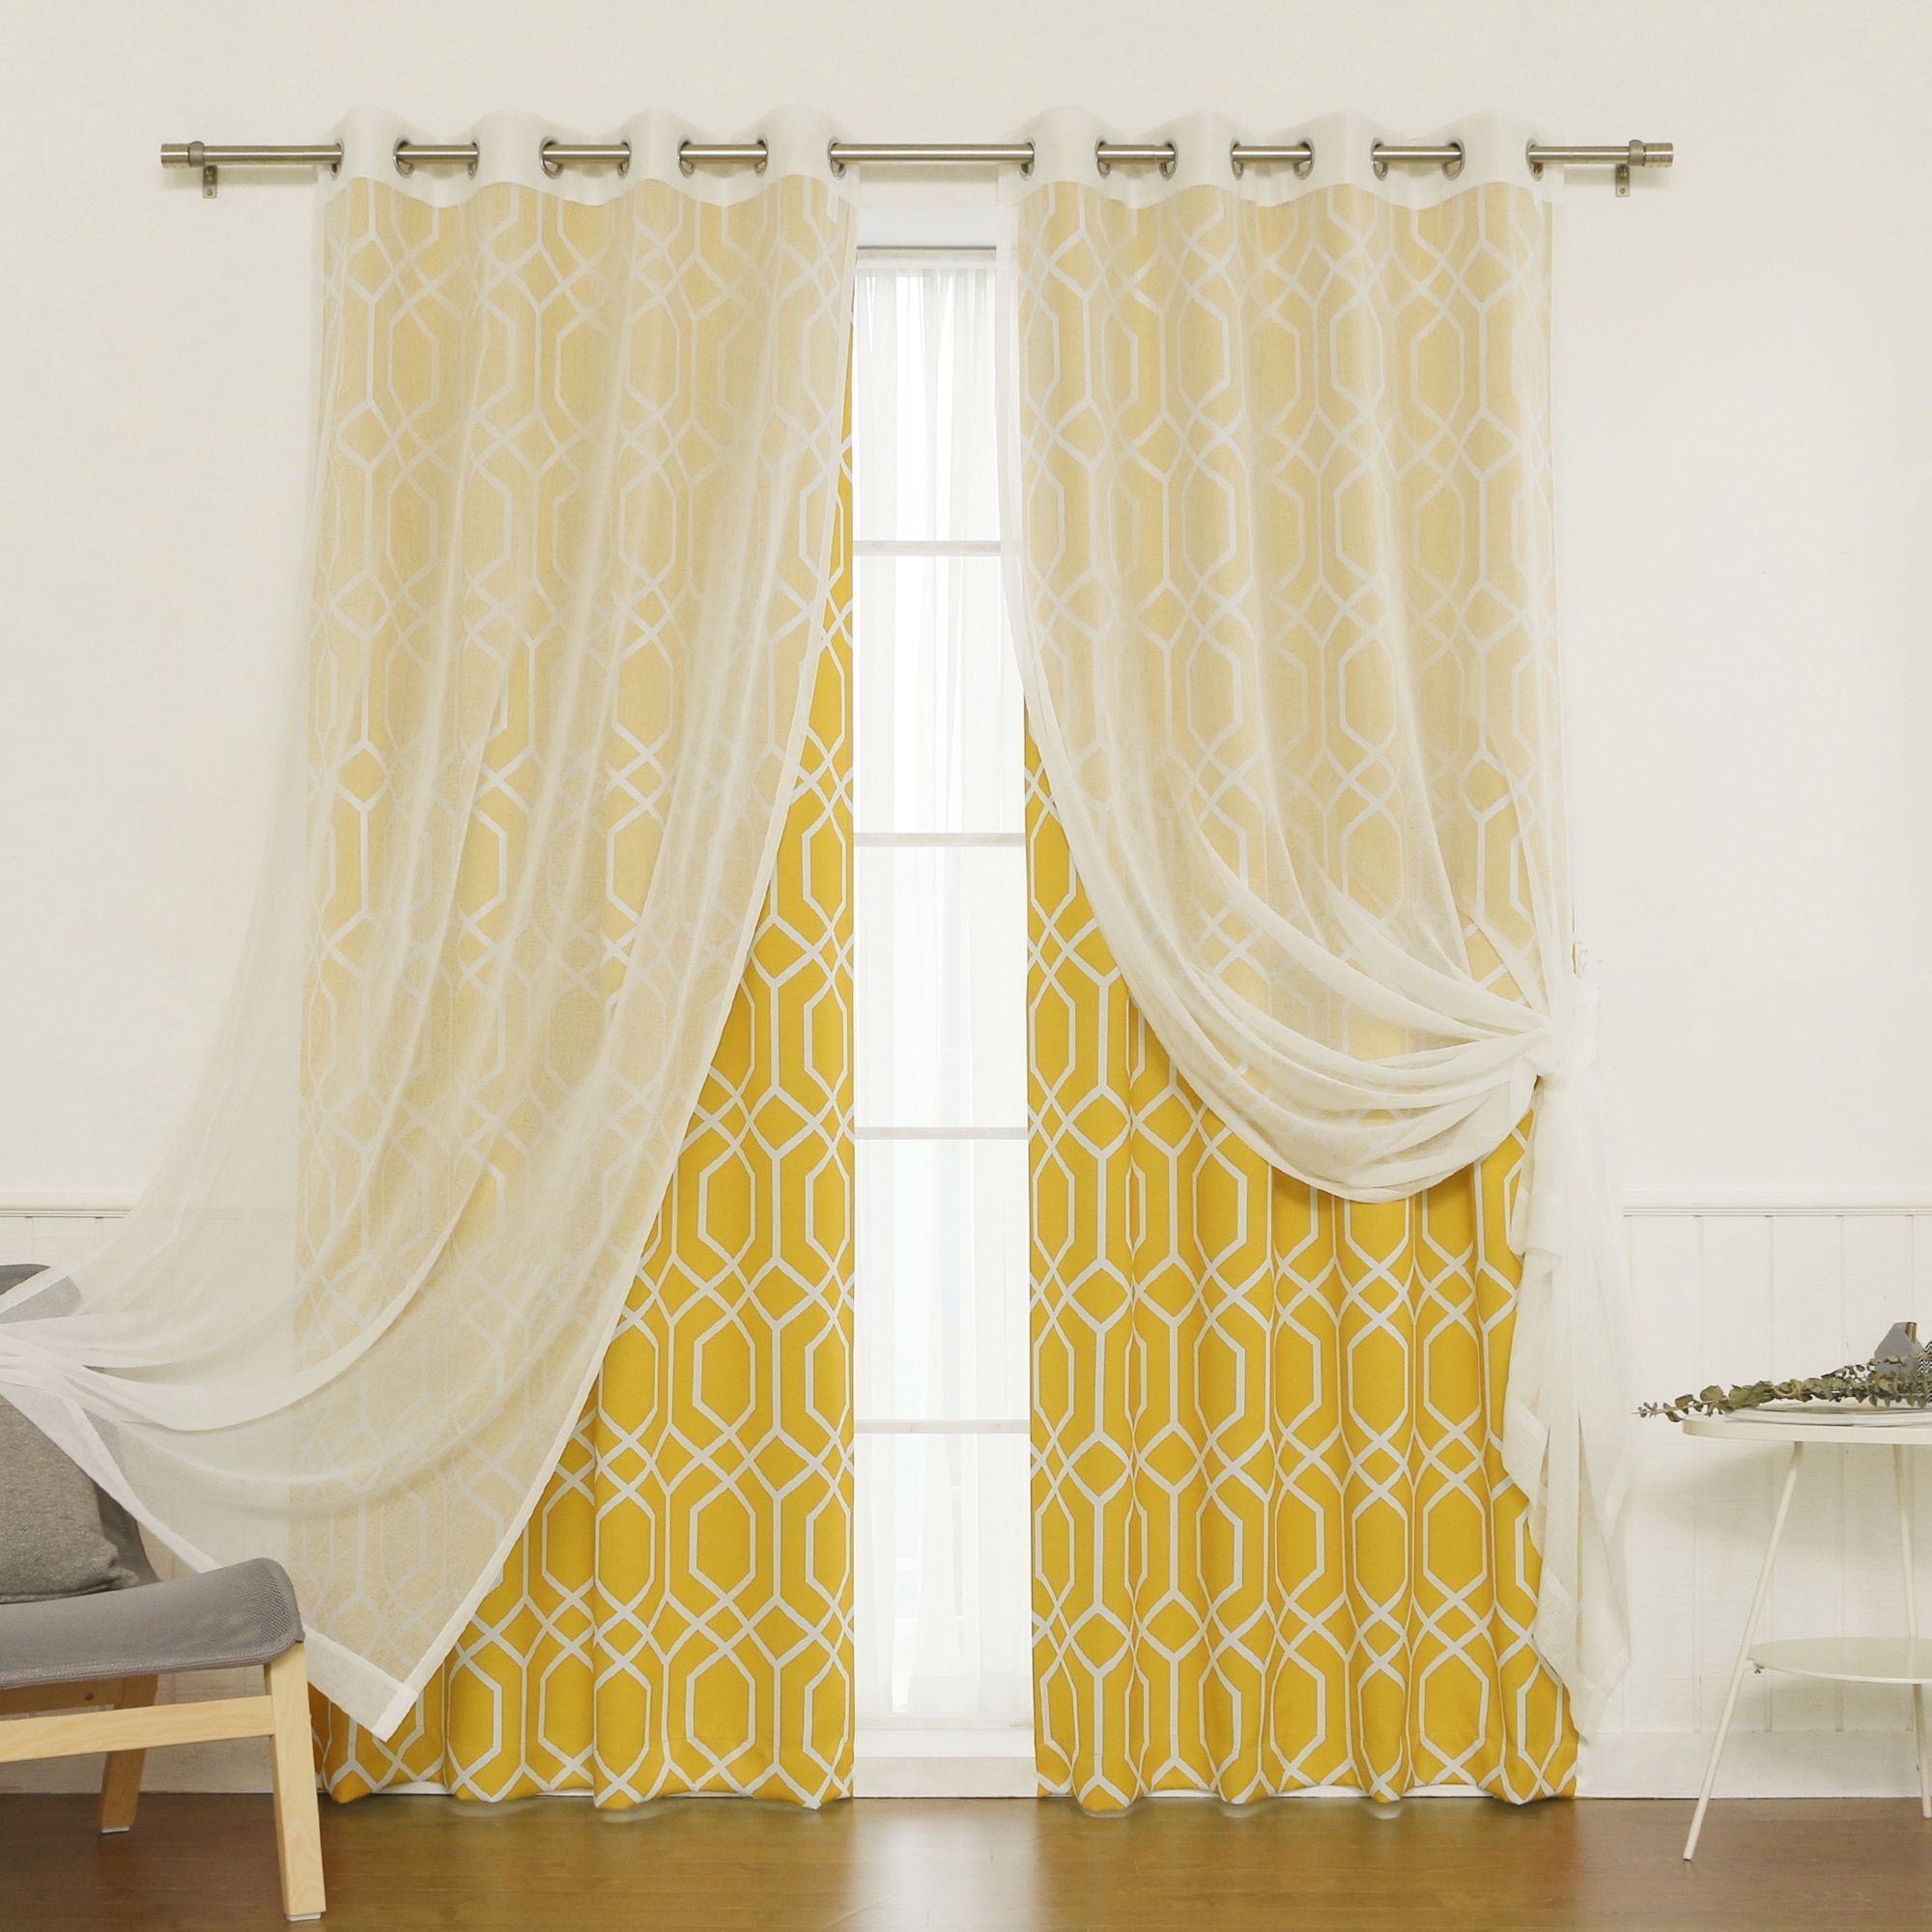 Aurora Home Mix And Match Curtains Muji Sheer Geometric Intended For Luxury Collection Monte Carlo Sheer Curtain Panel Pairs (Photo 13 of 20)